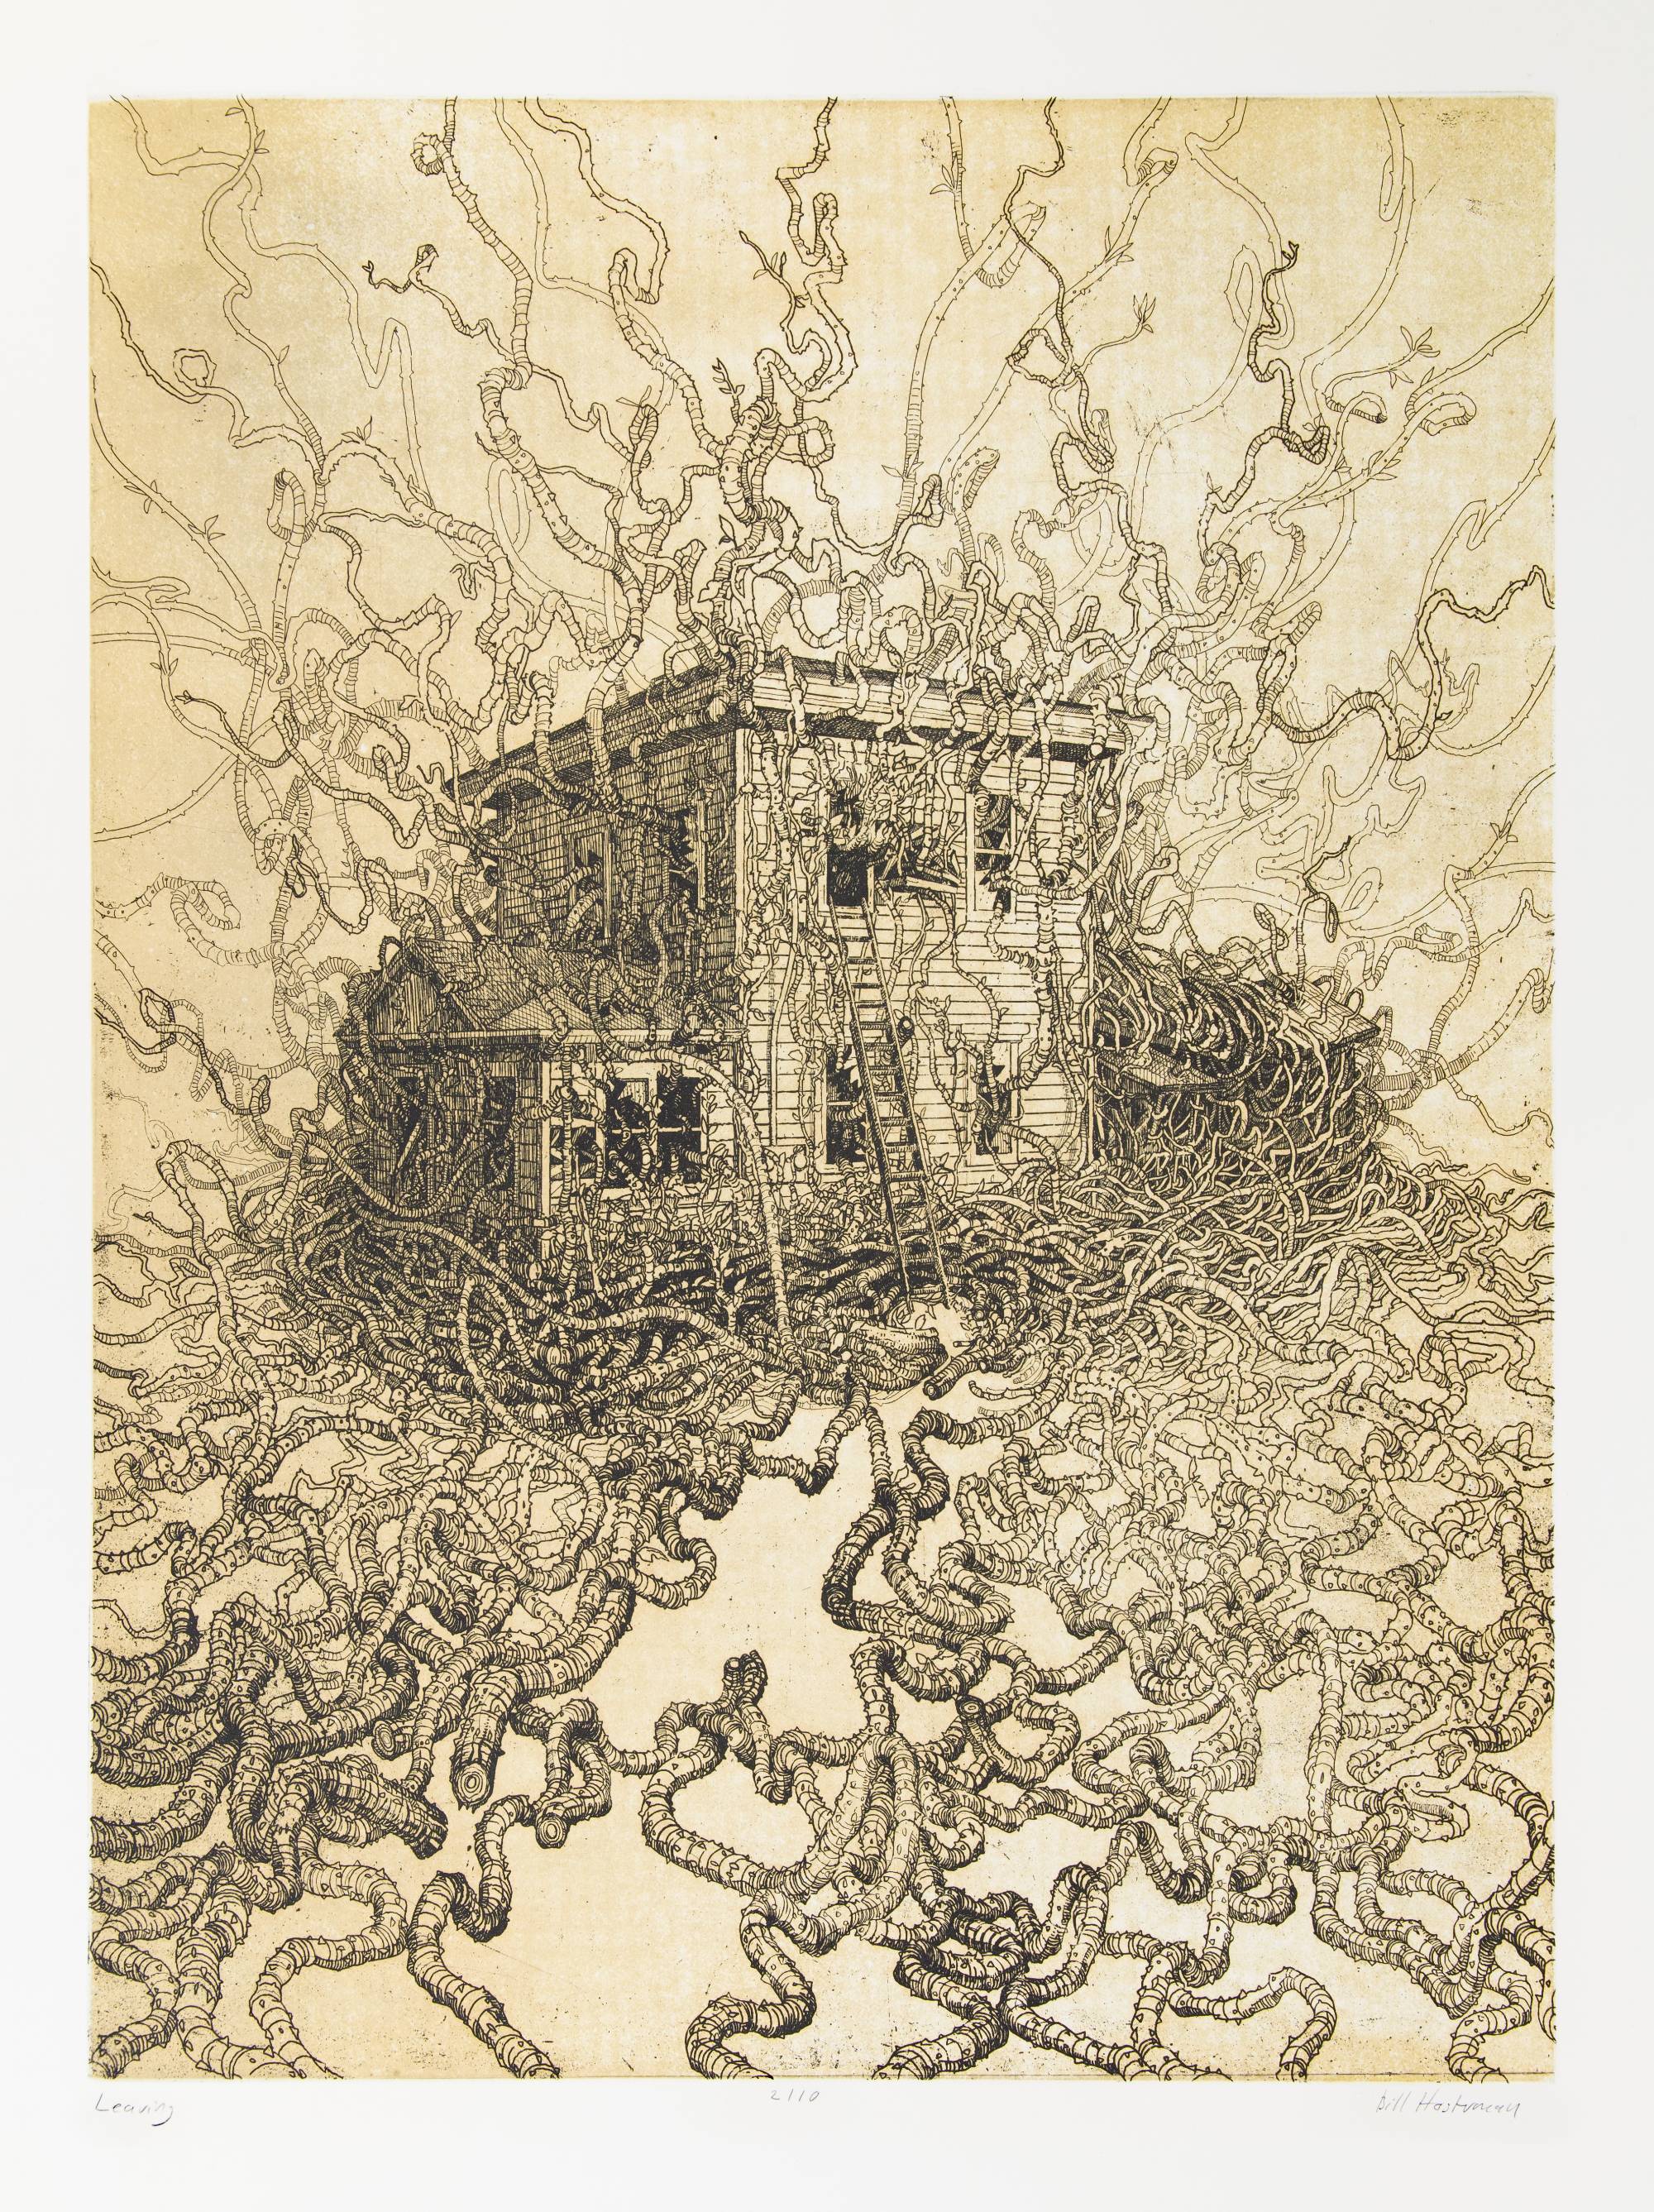 etching of midwestern-style two-story house covered in vines